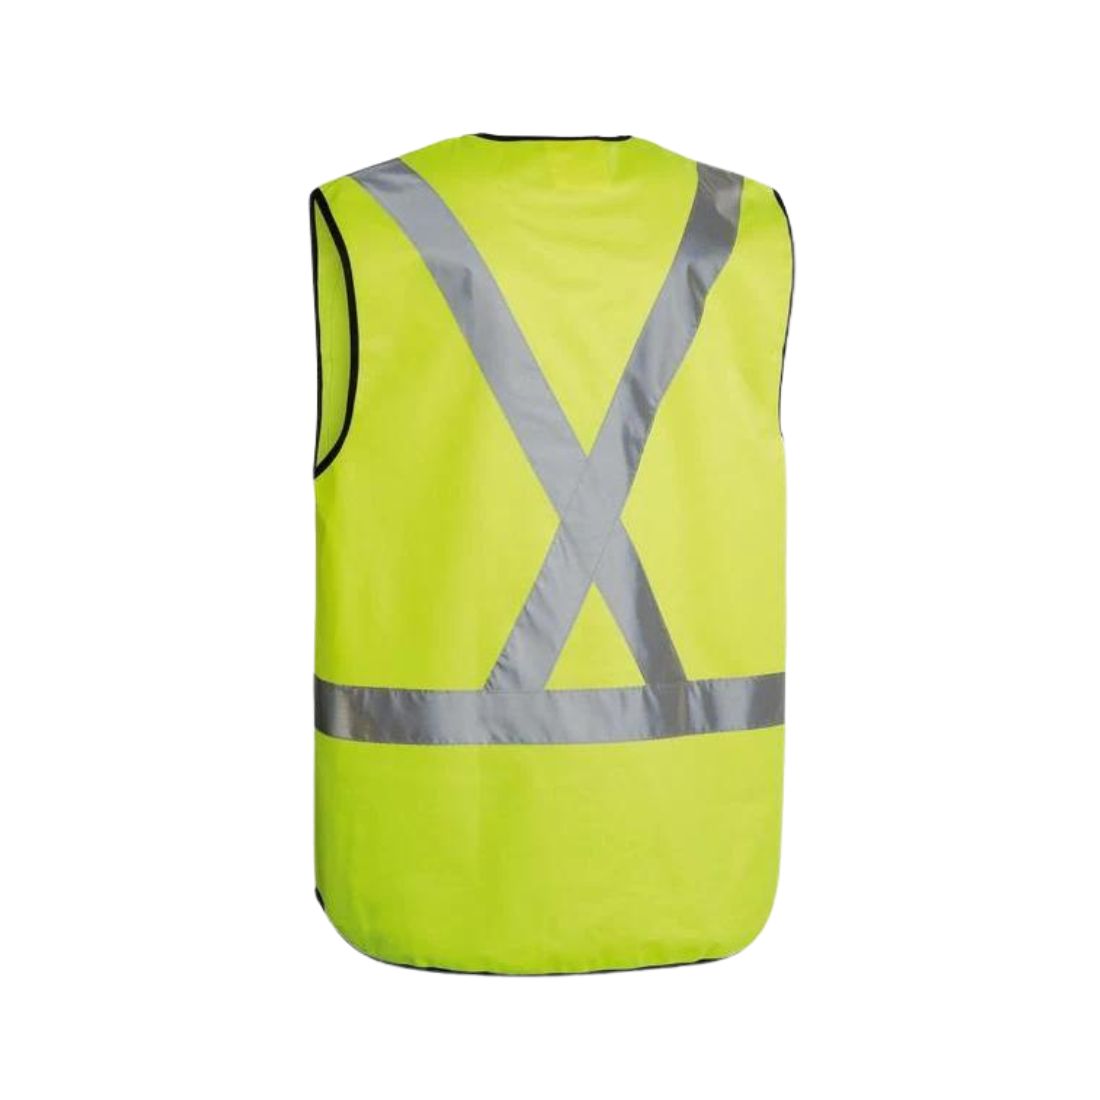 X-Taped Hi-Vis Vest Yellow Workwear by Bisley | The Bloke Shop